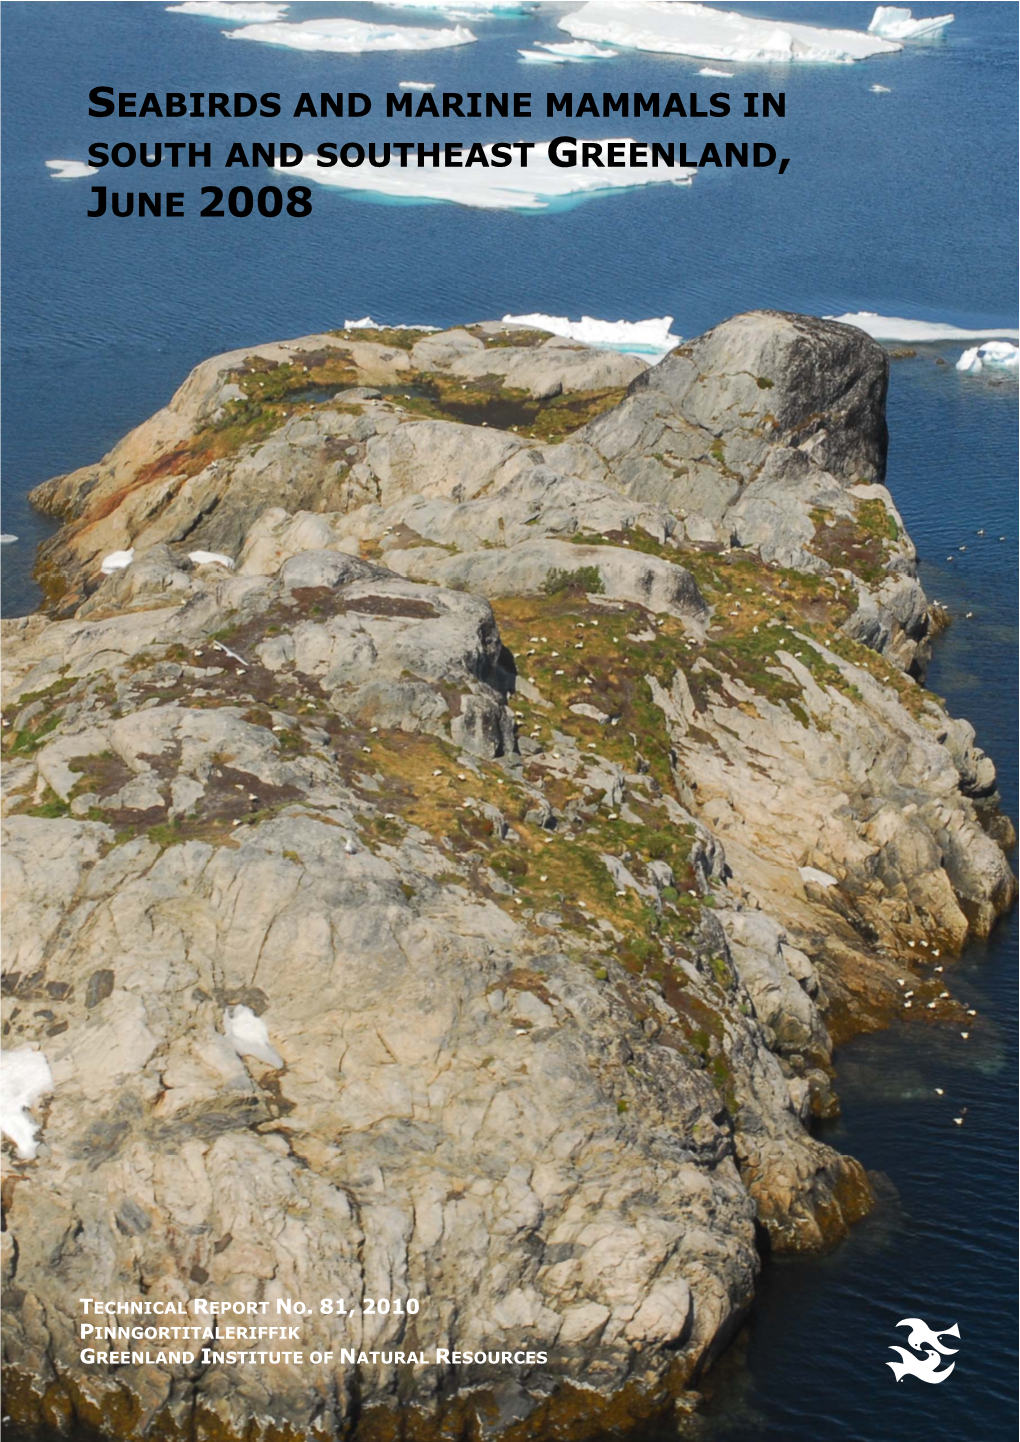 Seabirds and Marine Mammals in South and Southeast Greenland, June 2008